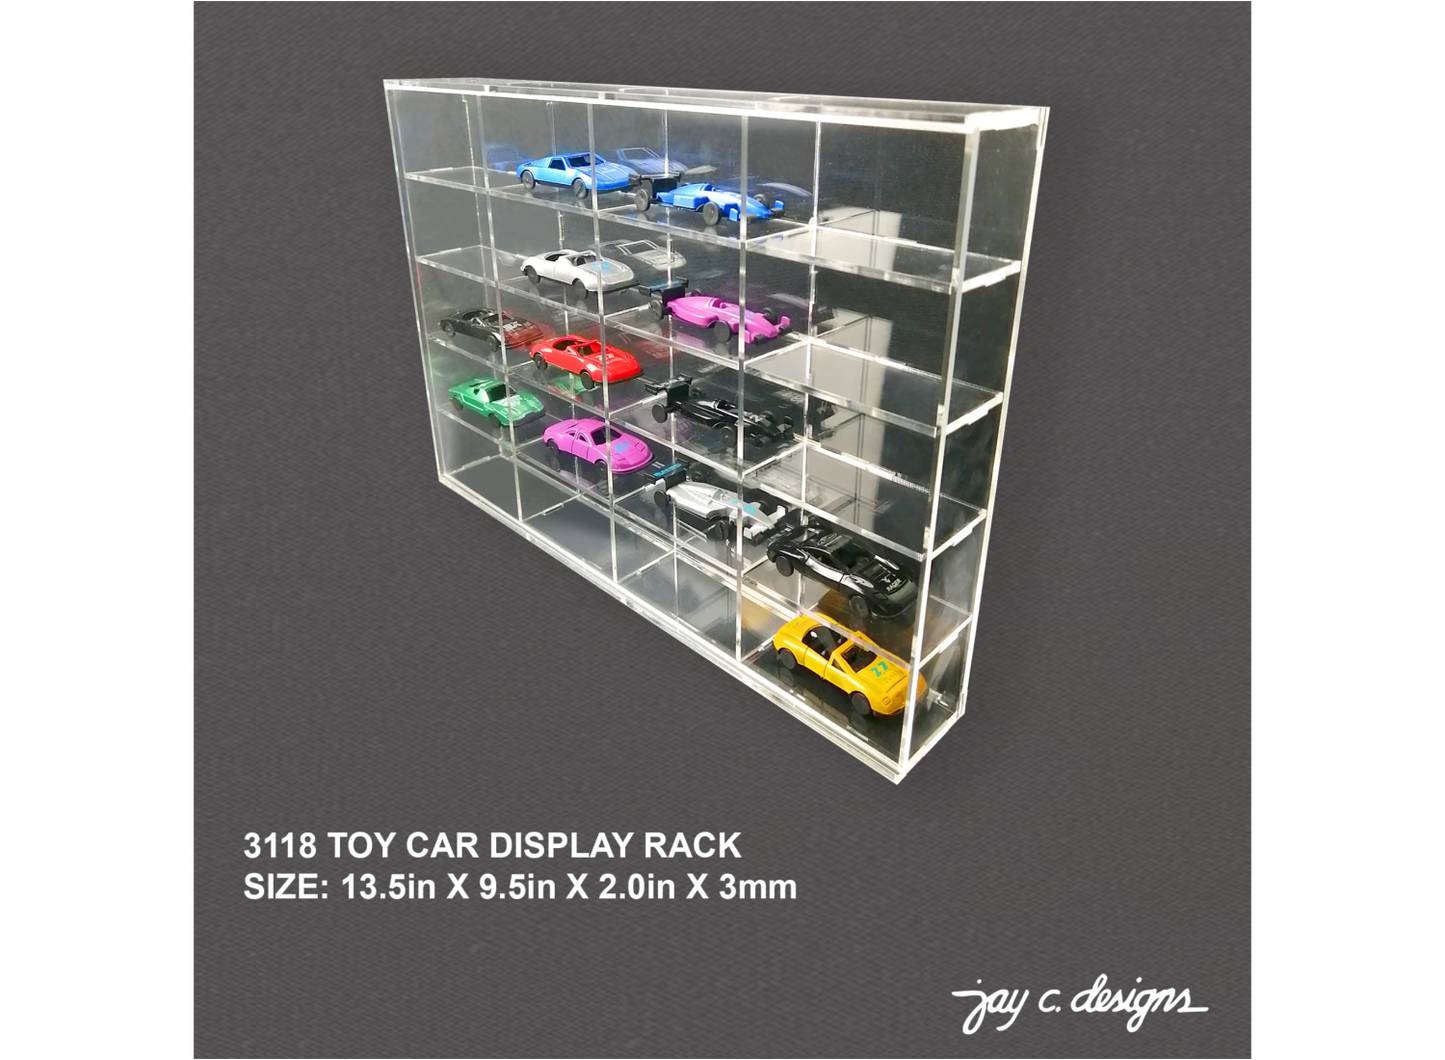 3118 Acrylic Toy Car Display Rack (13.5in (L) x 9.5in (H) x 2.5in (D) x 3.0mm)